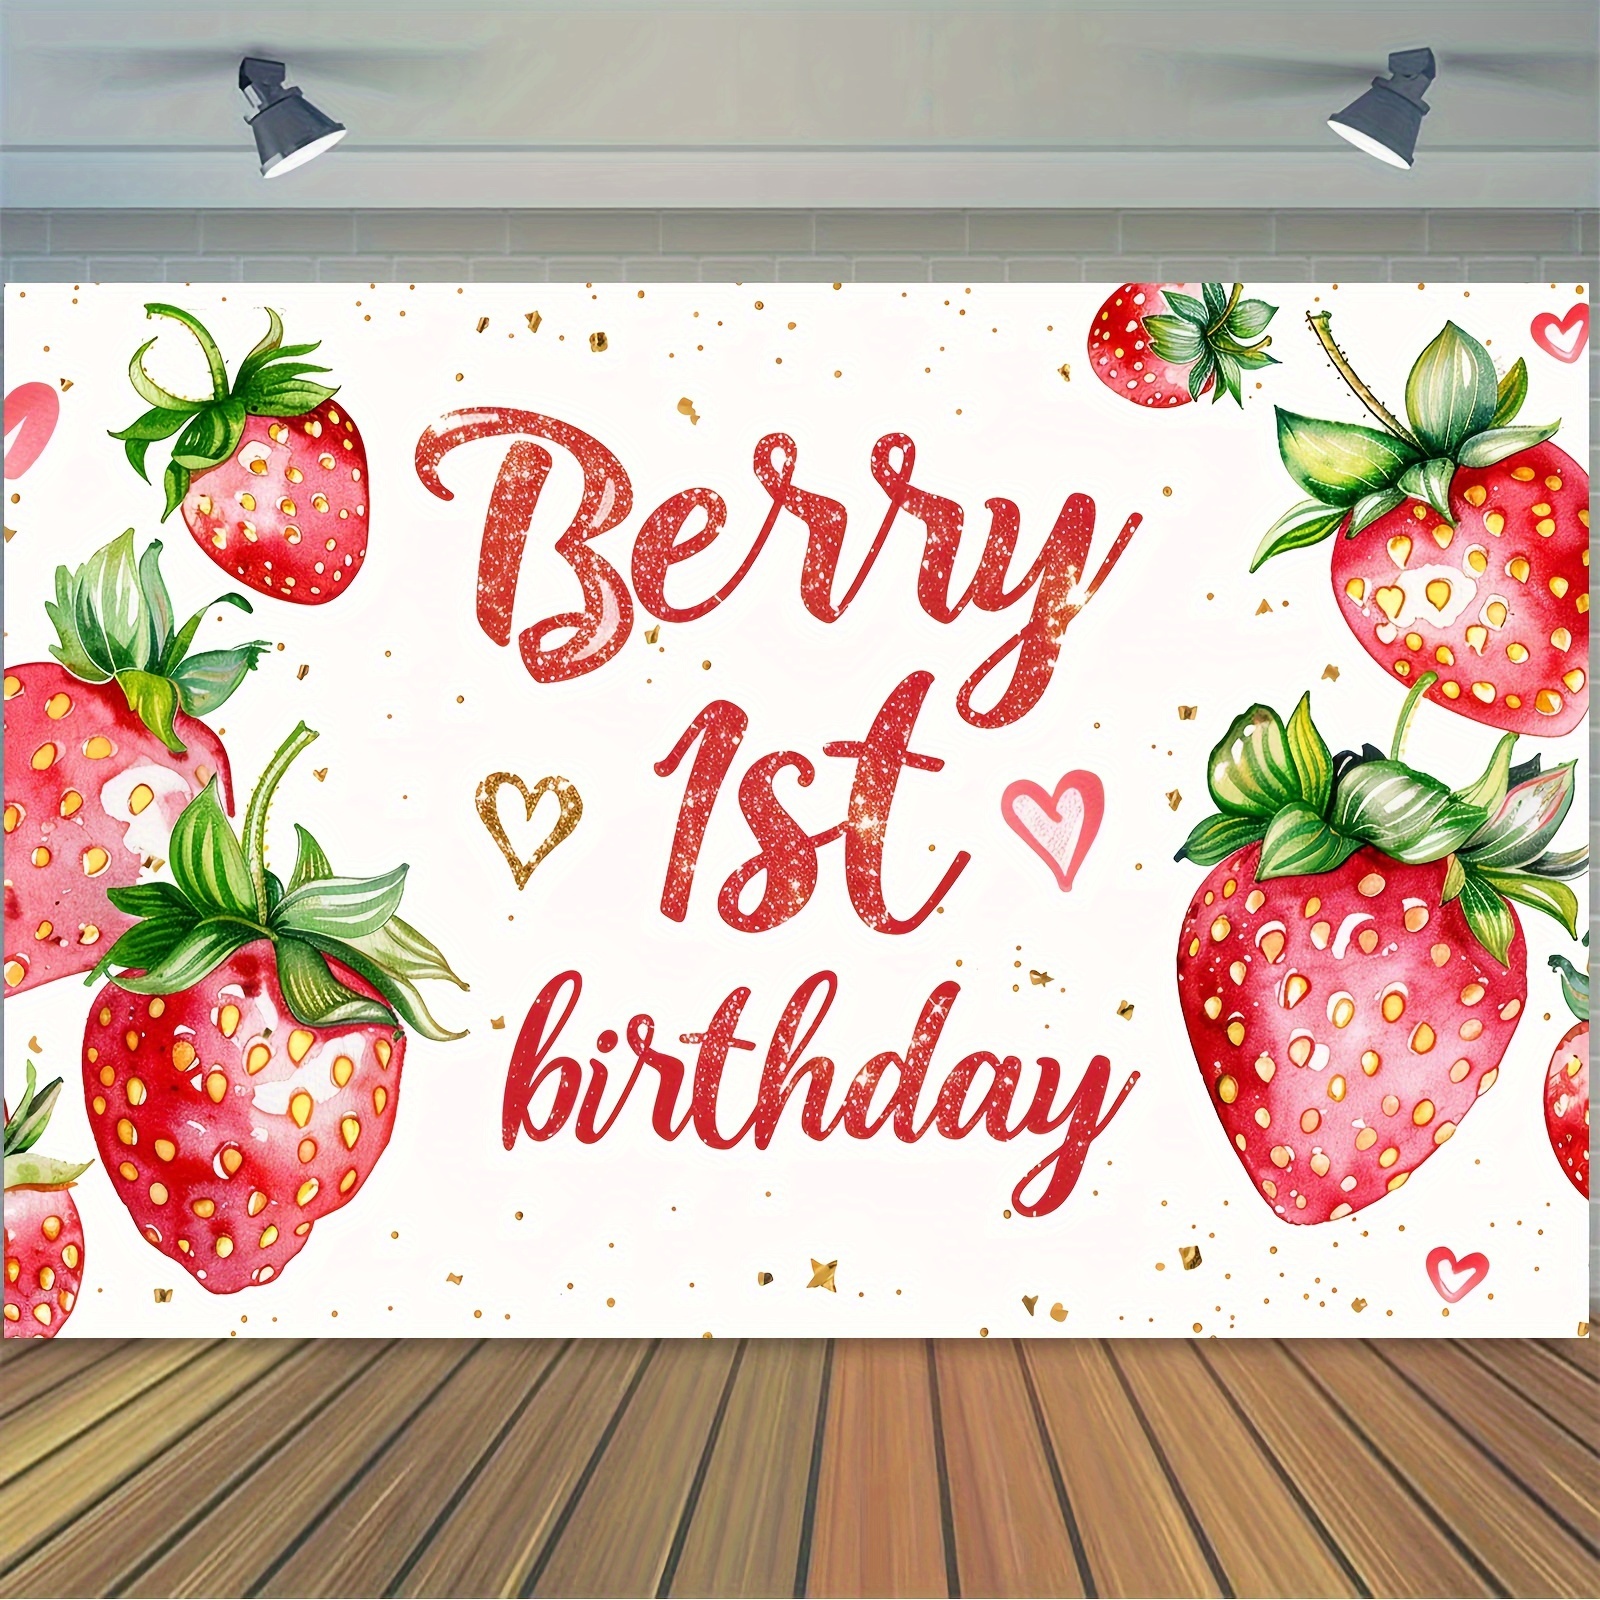 

Strawberry Themed 1st Birthday Vinyl Banner - 5x3 Ft Multipurpose Backdrop For Girl's First Birthday, Baby Shower, Bridal Shower, And Other Celebrations, Room And Garden Decor, No Electricity Required